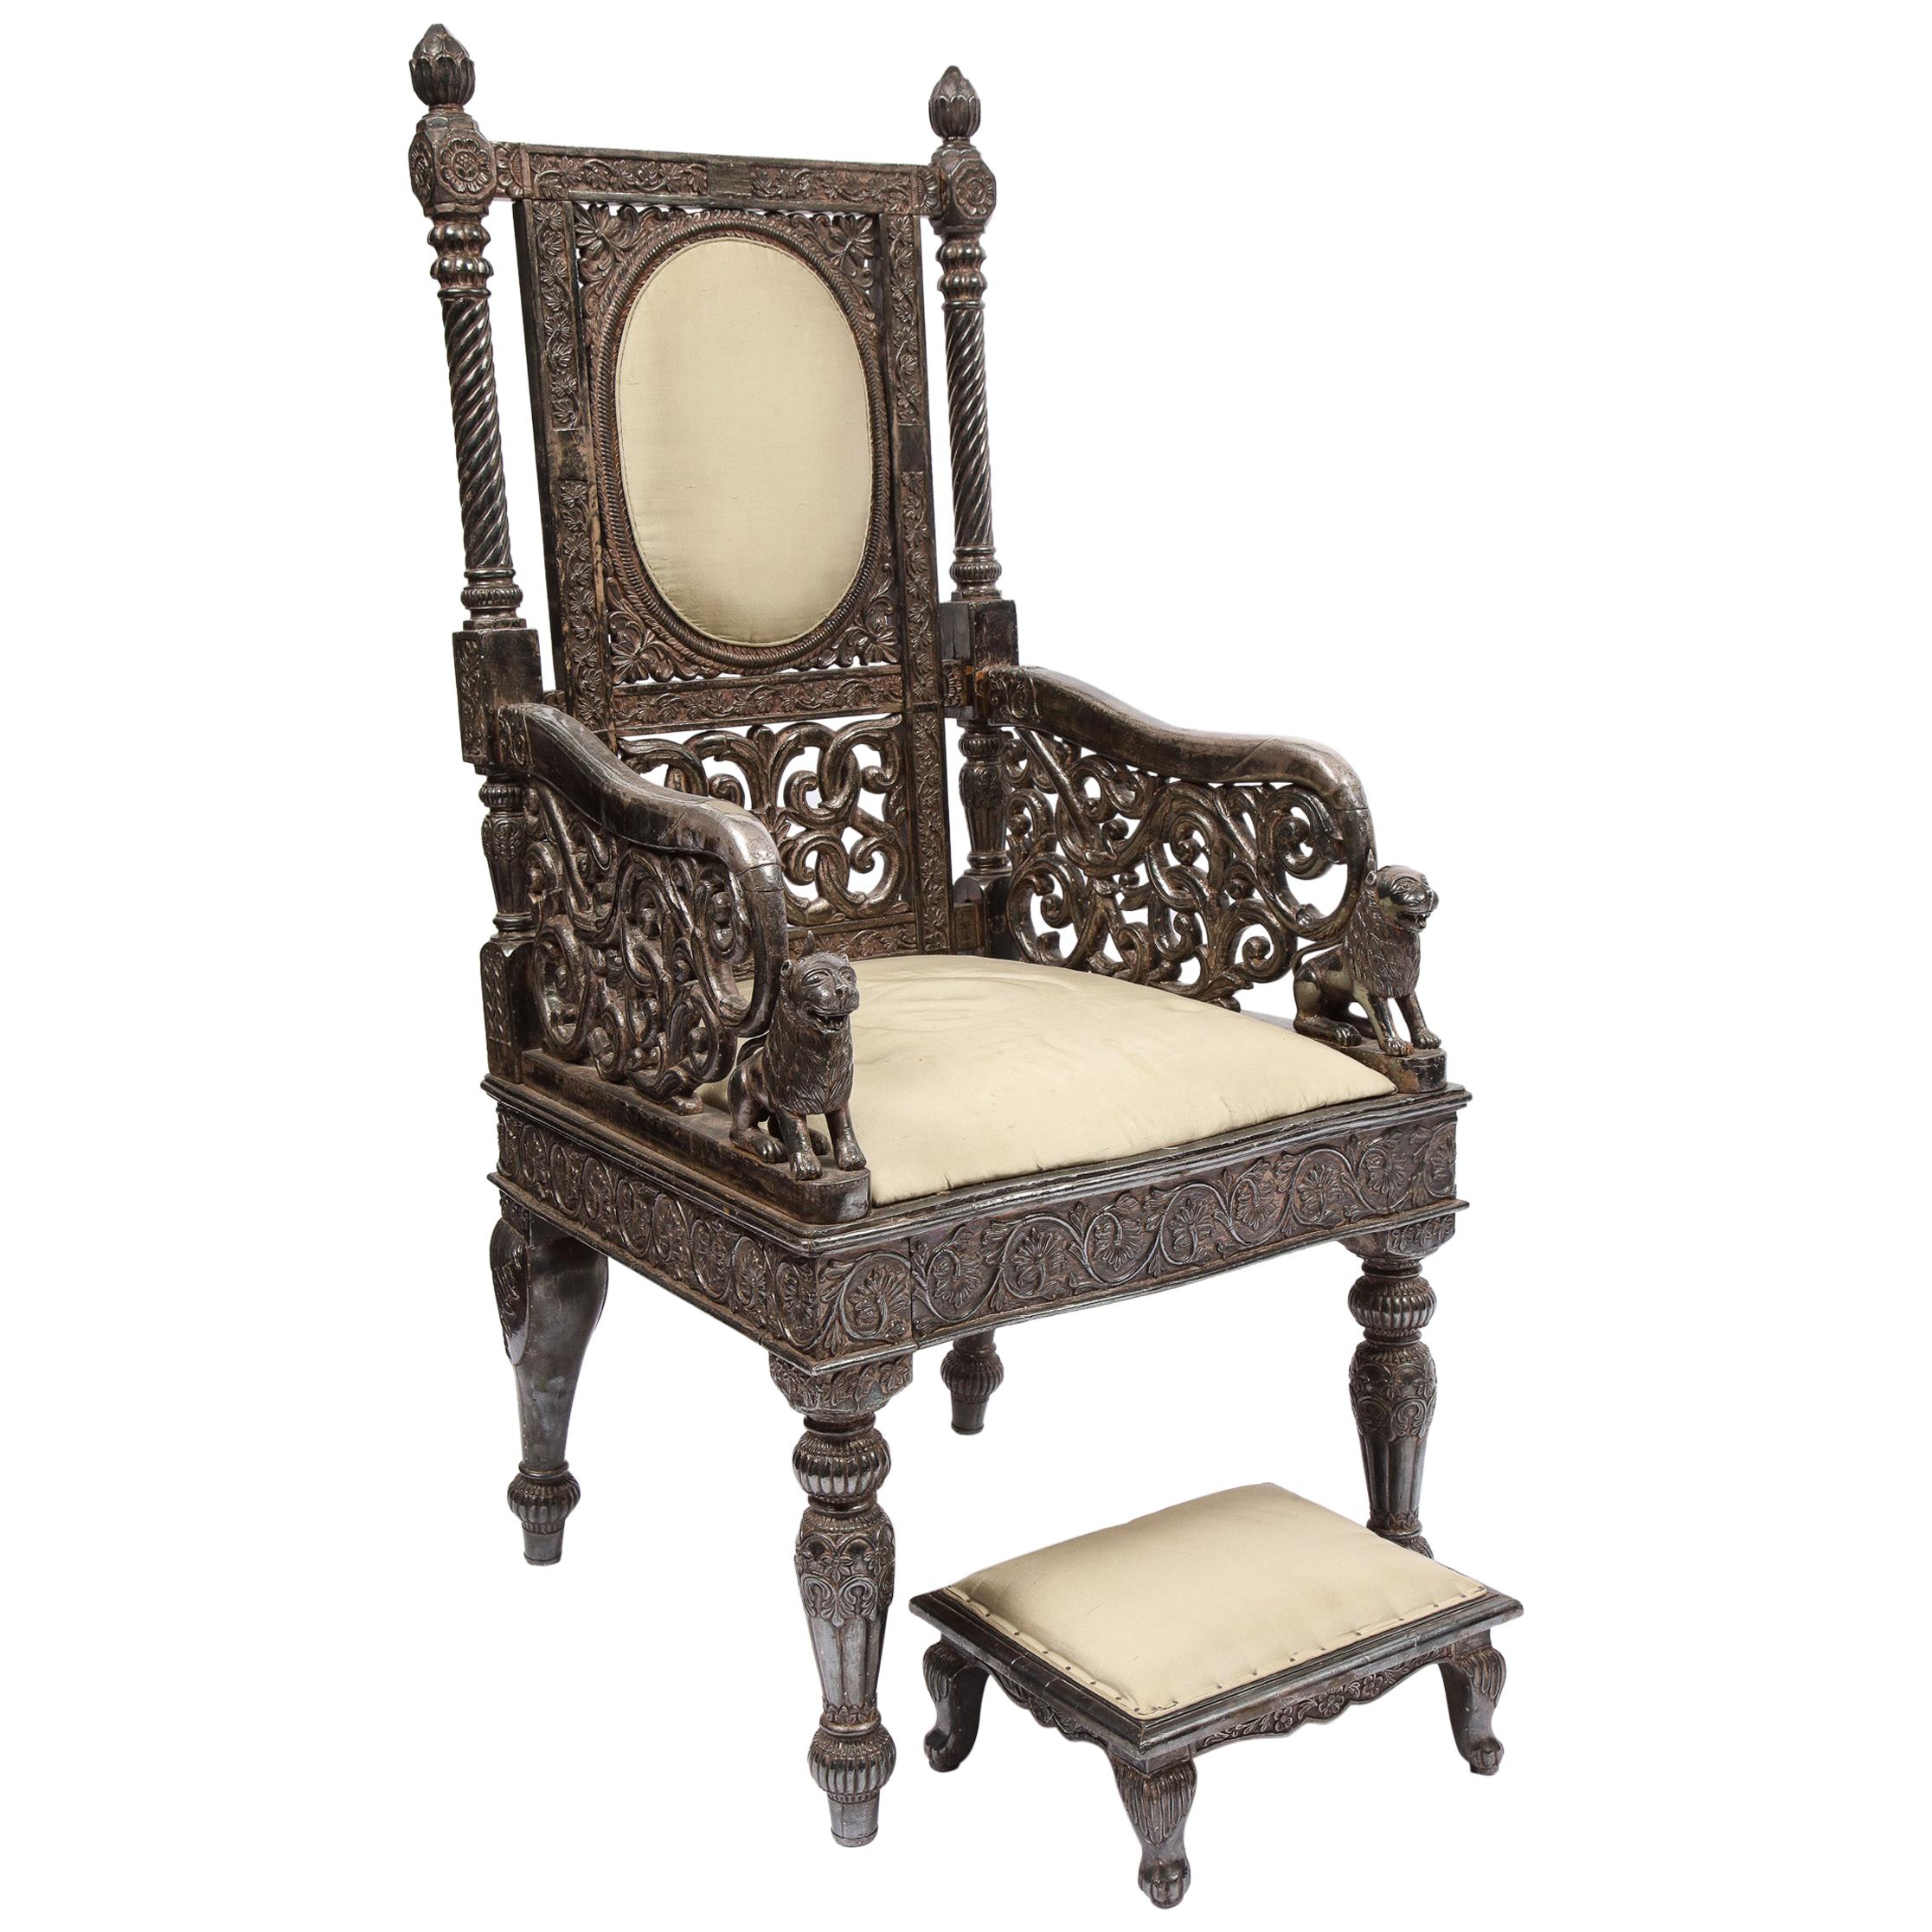 Indian Mogul Style Silver-Clad Gilded Ceremonial Throne Chair for the Maharajah For Sale